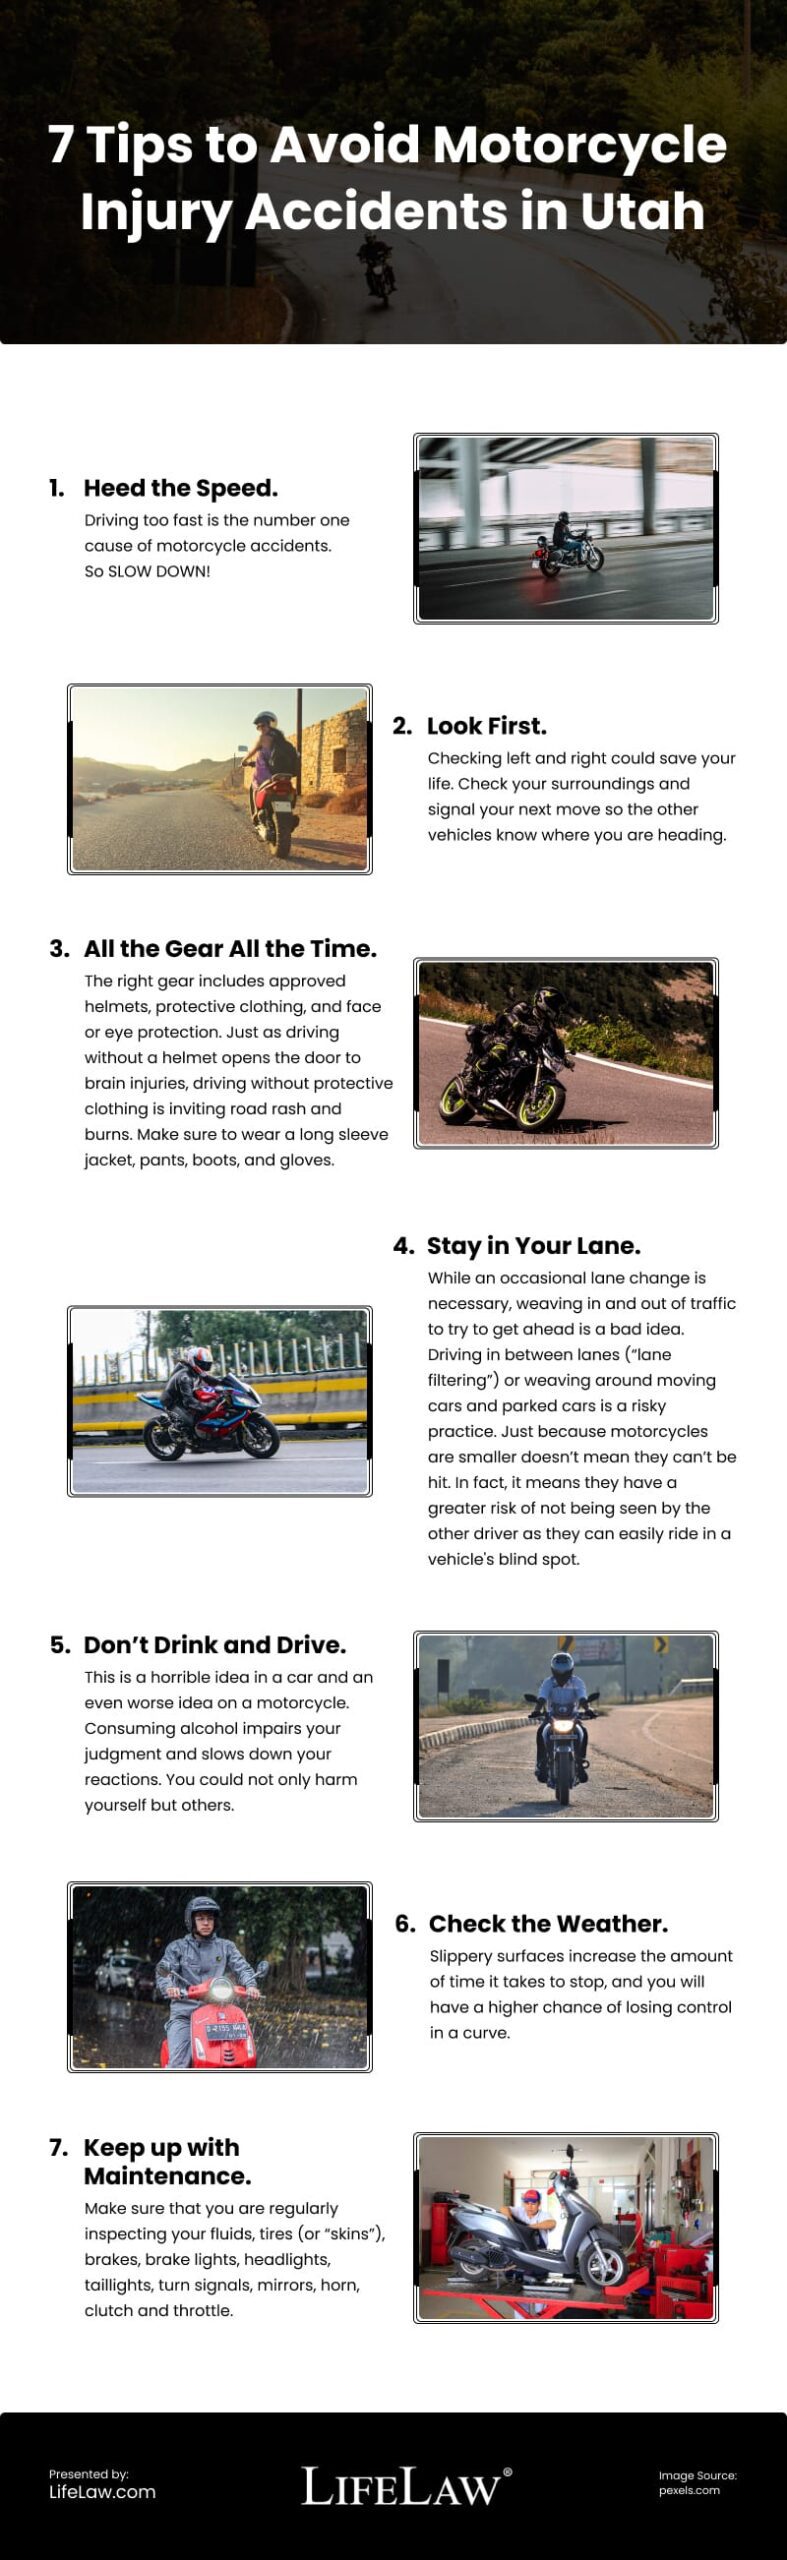 7 Tips to Avoid Motorcycle Injury Accidents in Utah Infographic